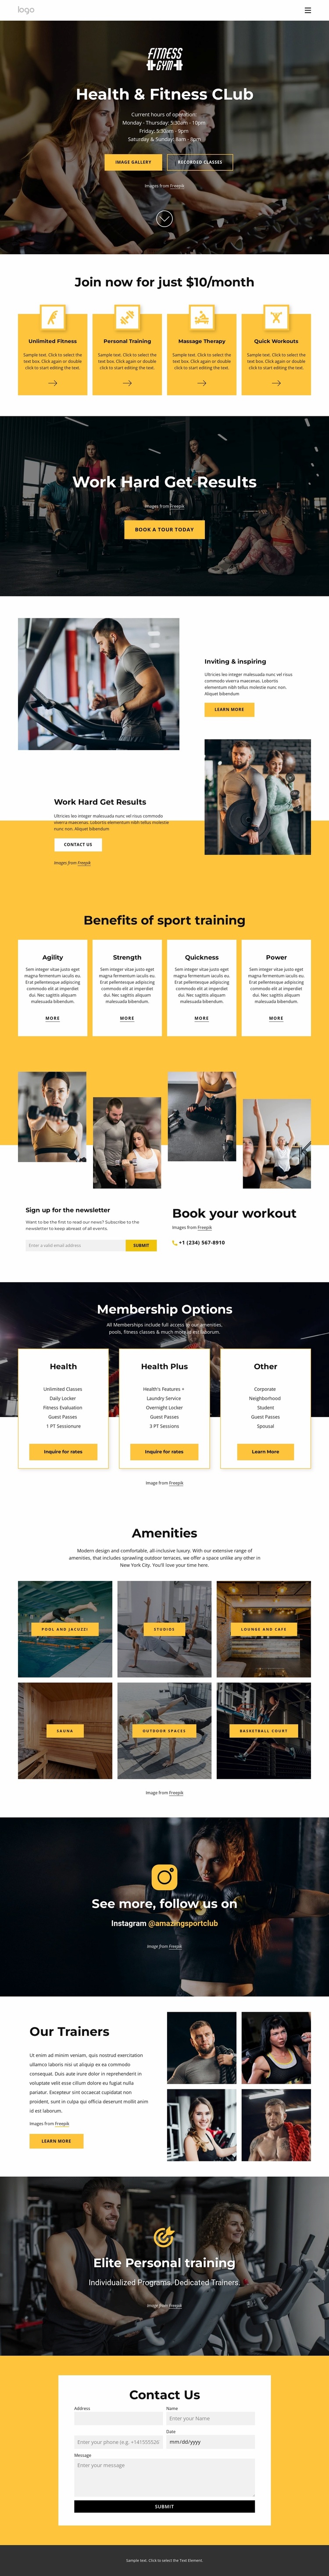 Health and fitness club Website Design